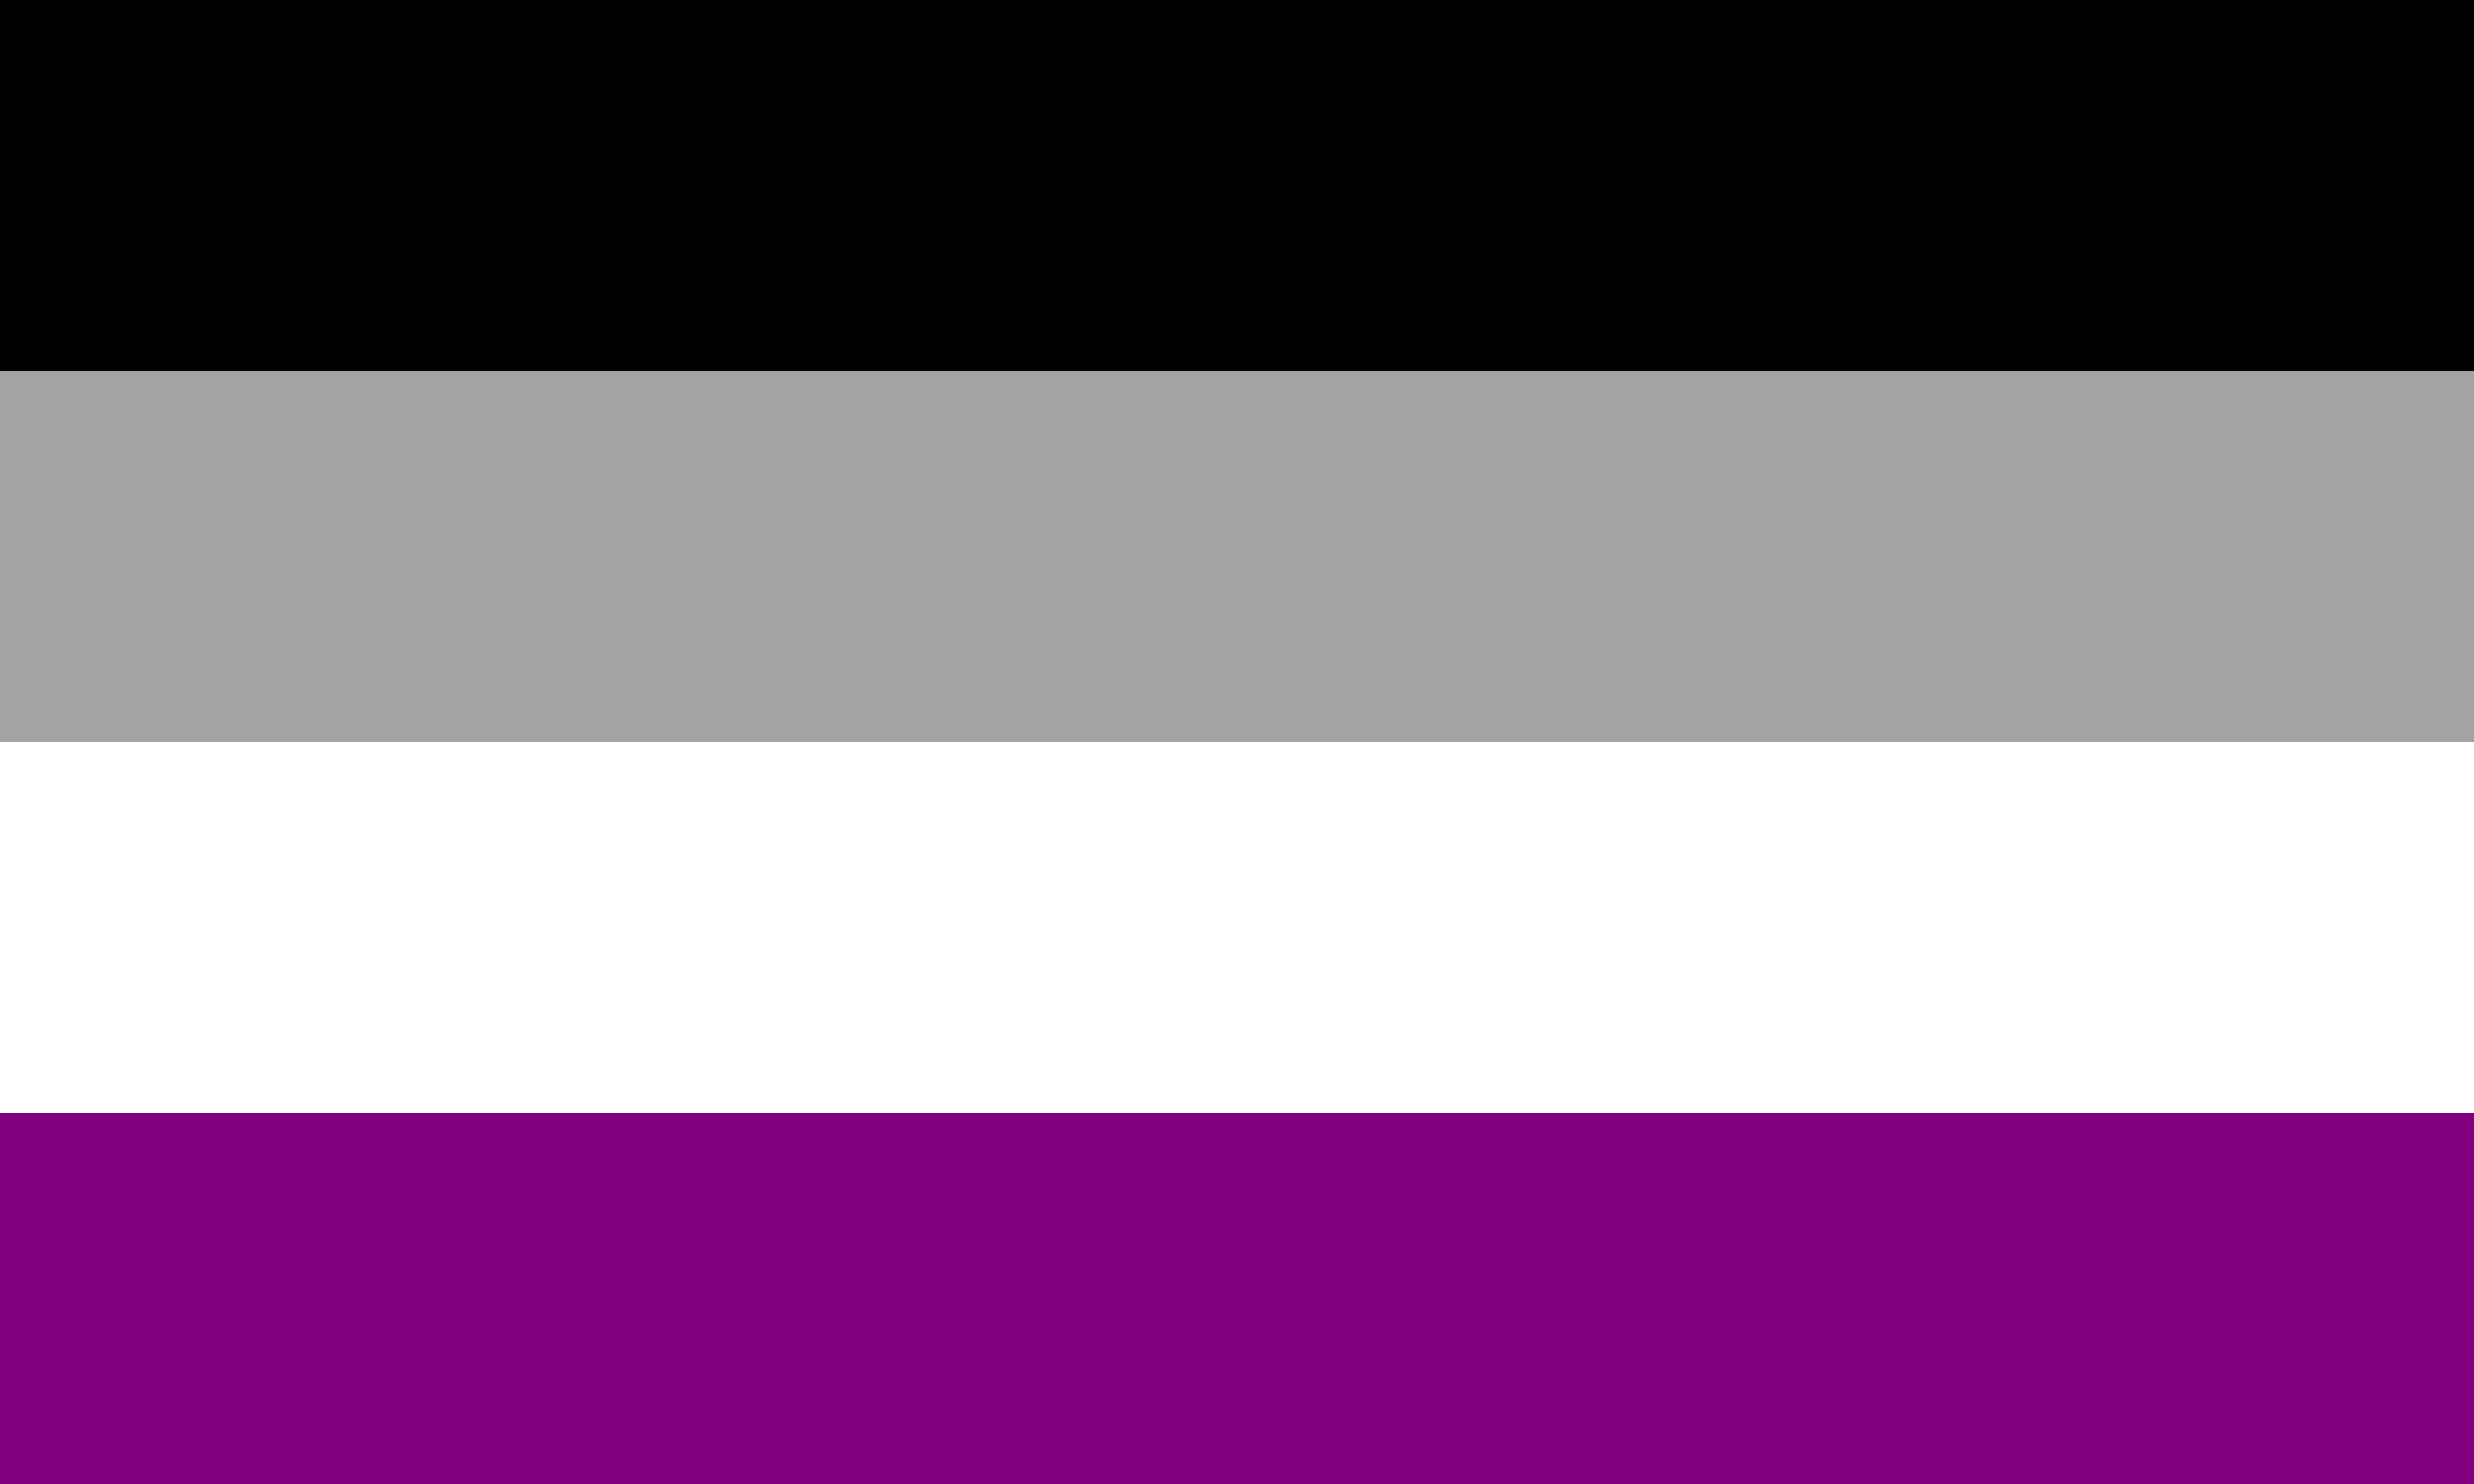 Asexual flag with black, grey, white and purple horizontal lines